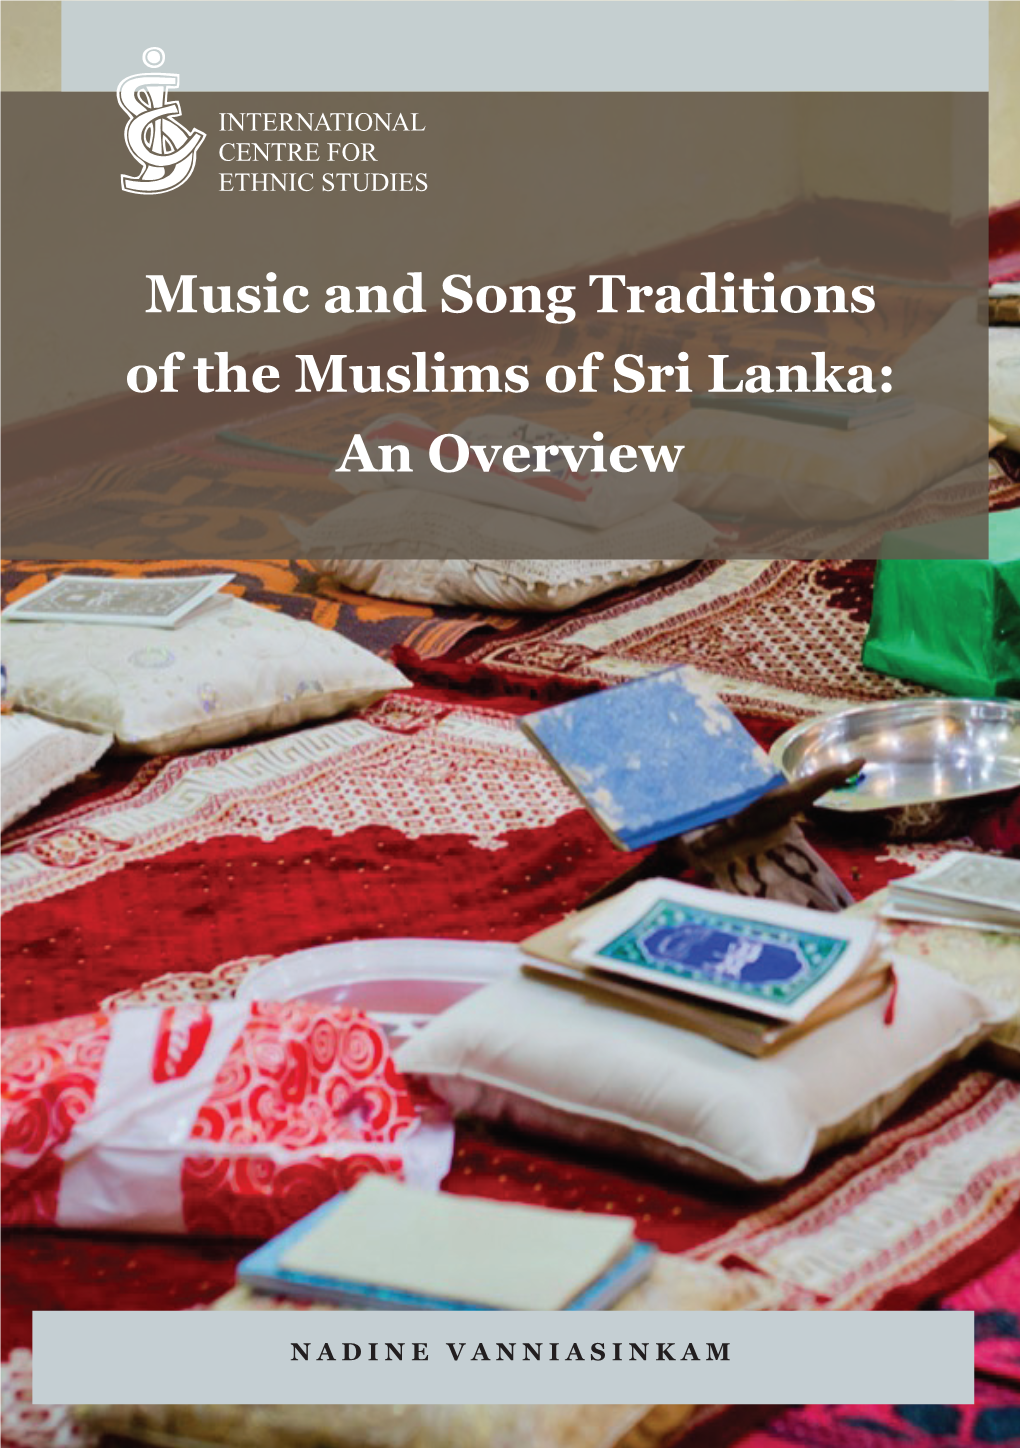 Music and Song Traditions of the Muslims of Sri Lanka: an Overview